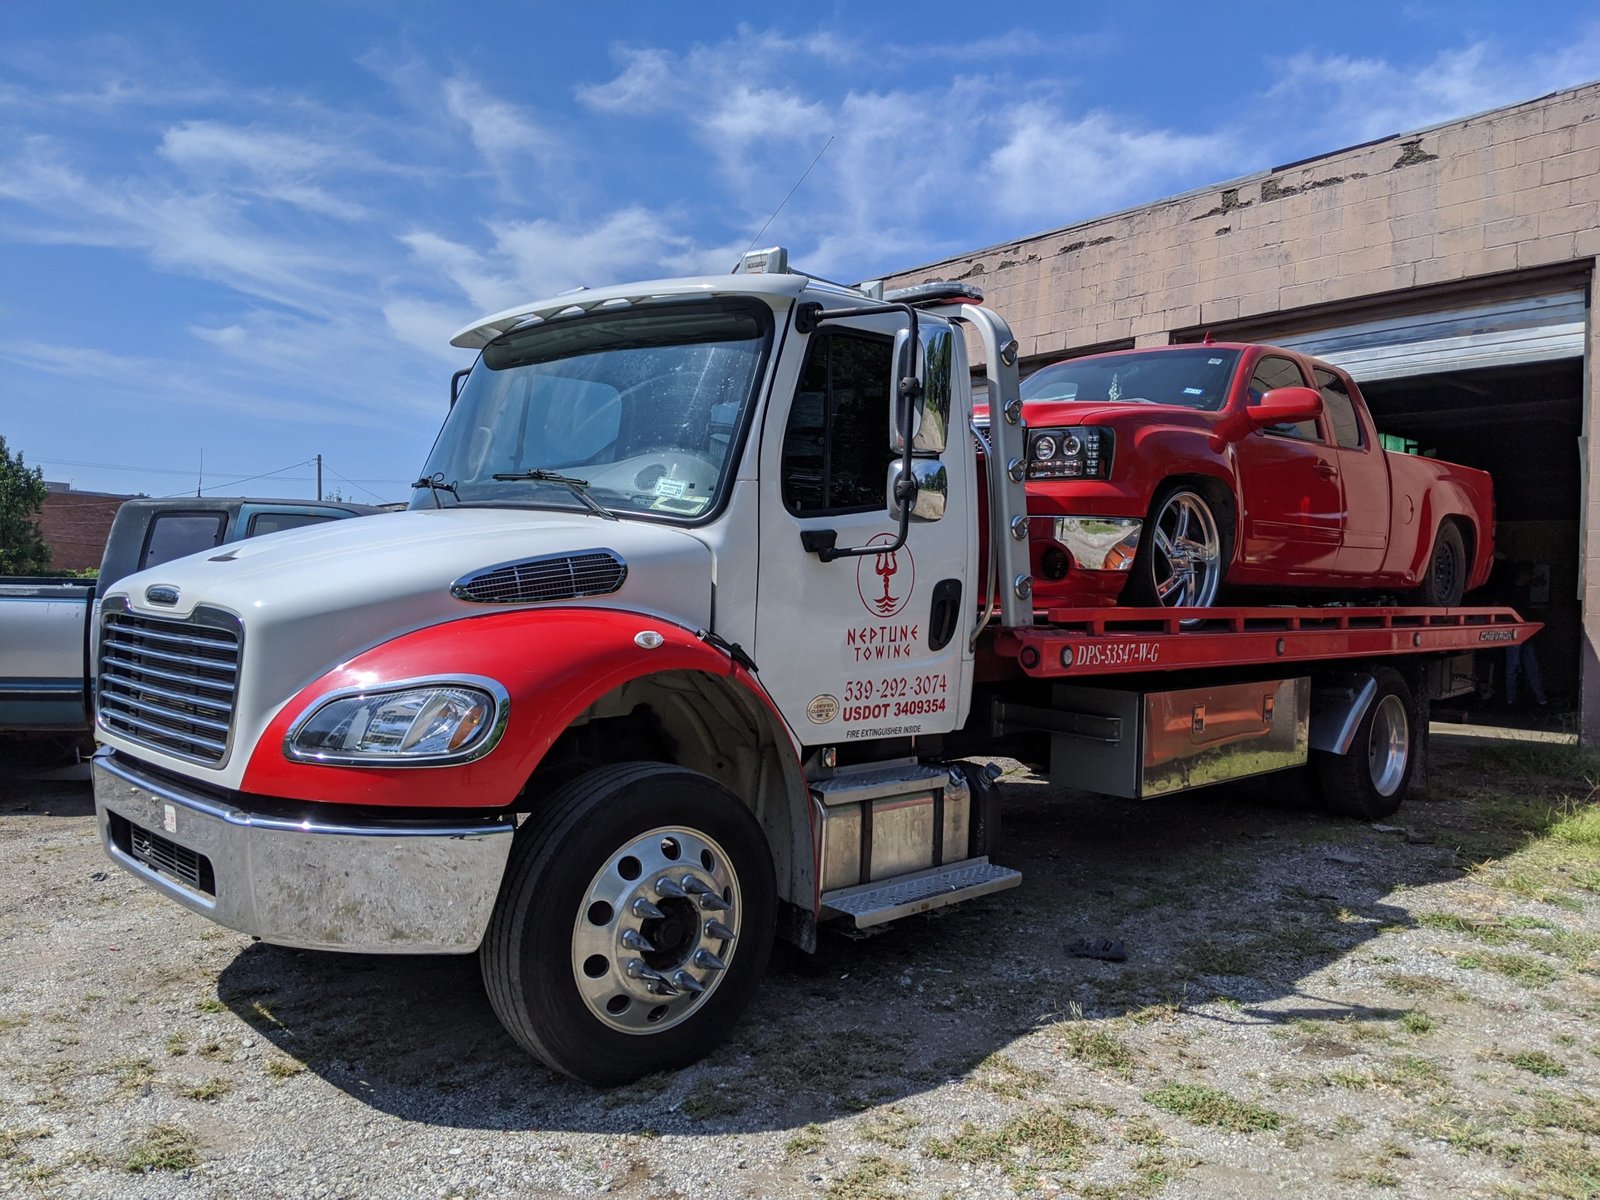 Oops, Your Car’s Impounded: Now What? A Guide to Tulsa’s Rules and Regulations with Neptune Towing Service.